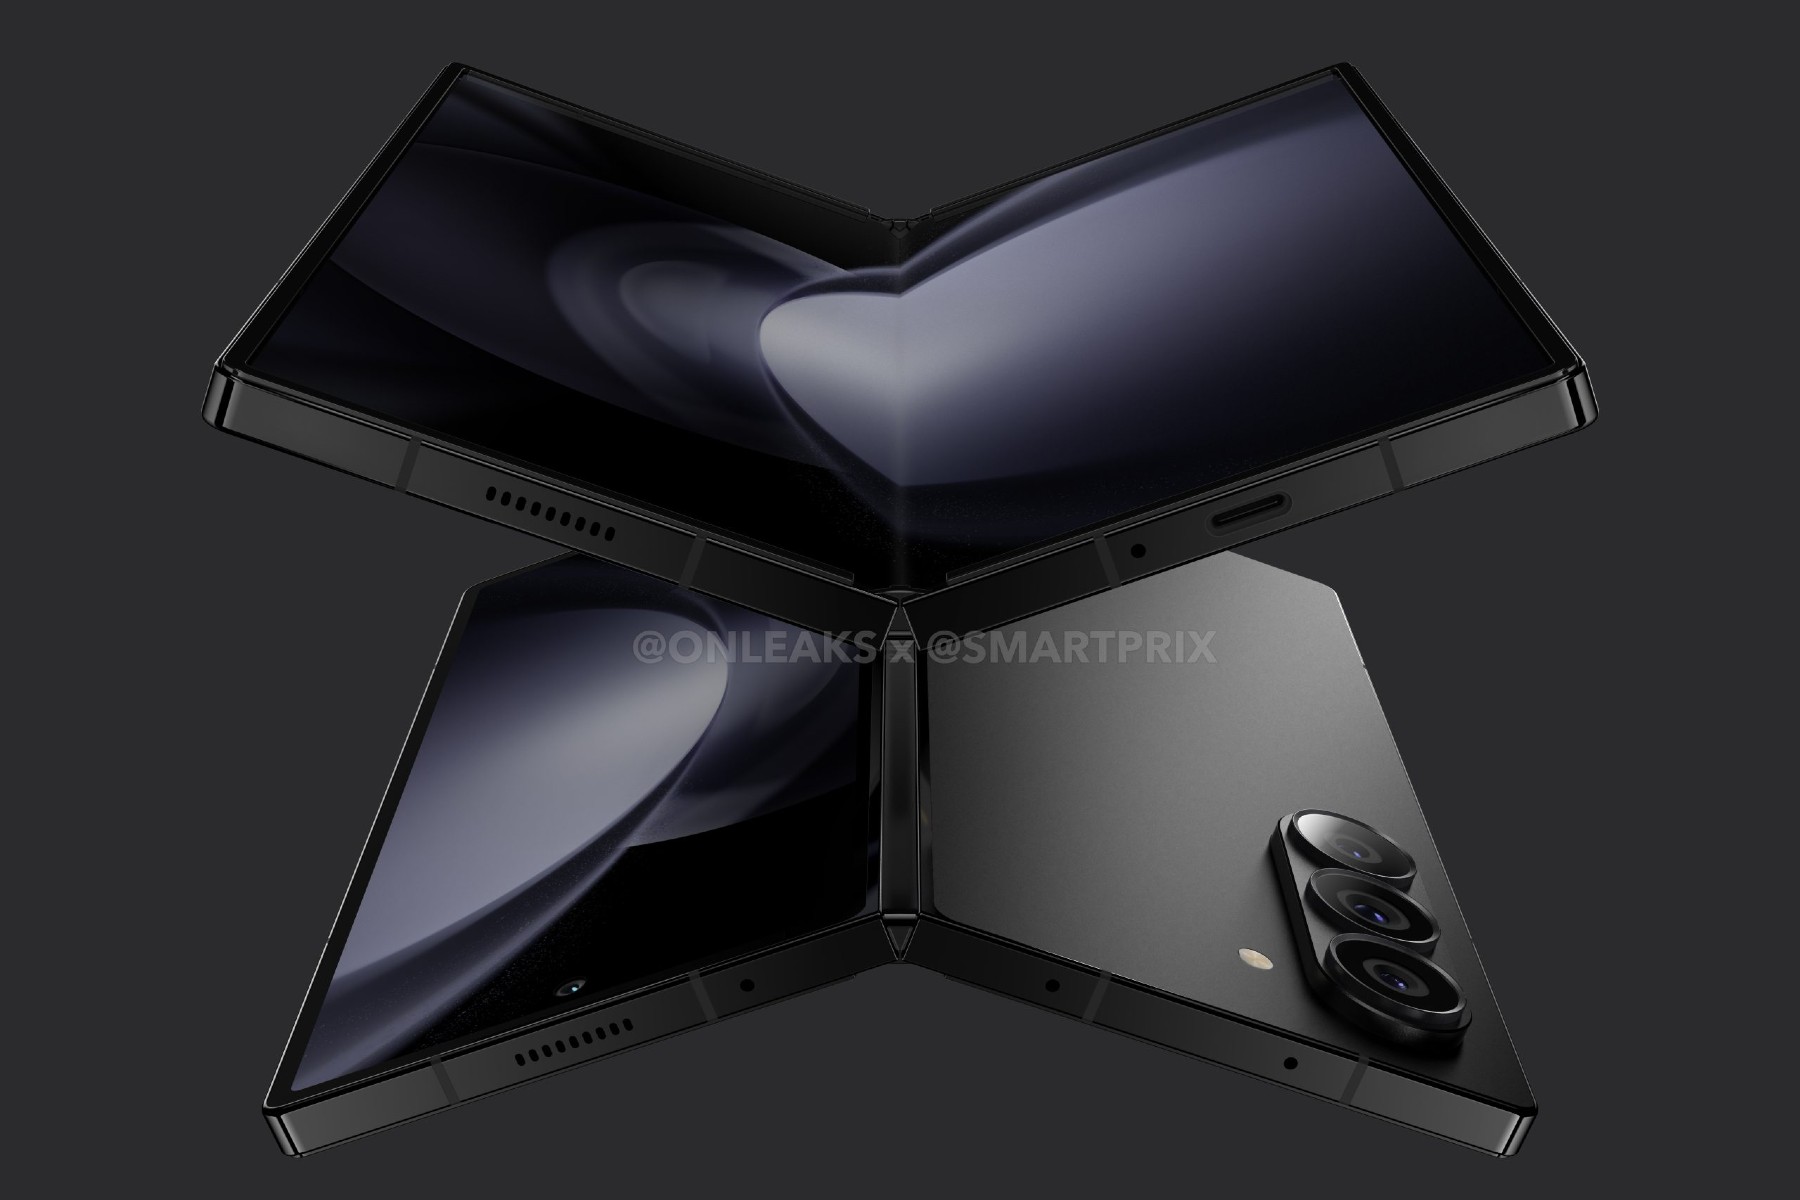 According to a report, Samsung is developing a Galaxy Z Fold 6 “Ultra”.

